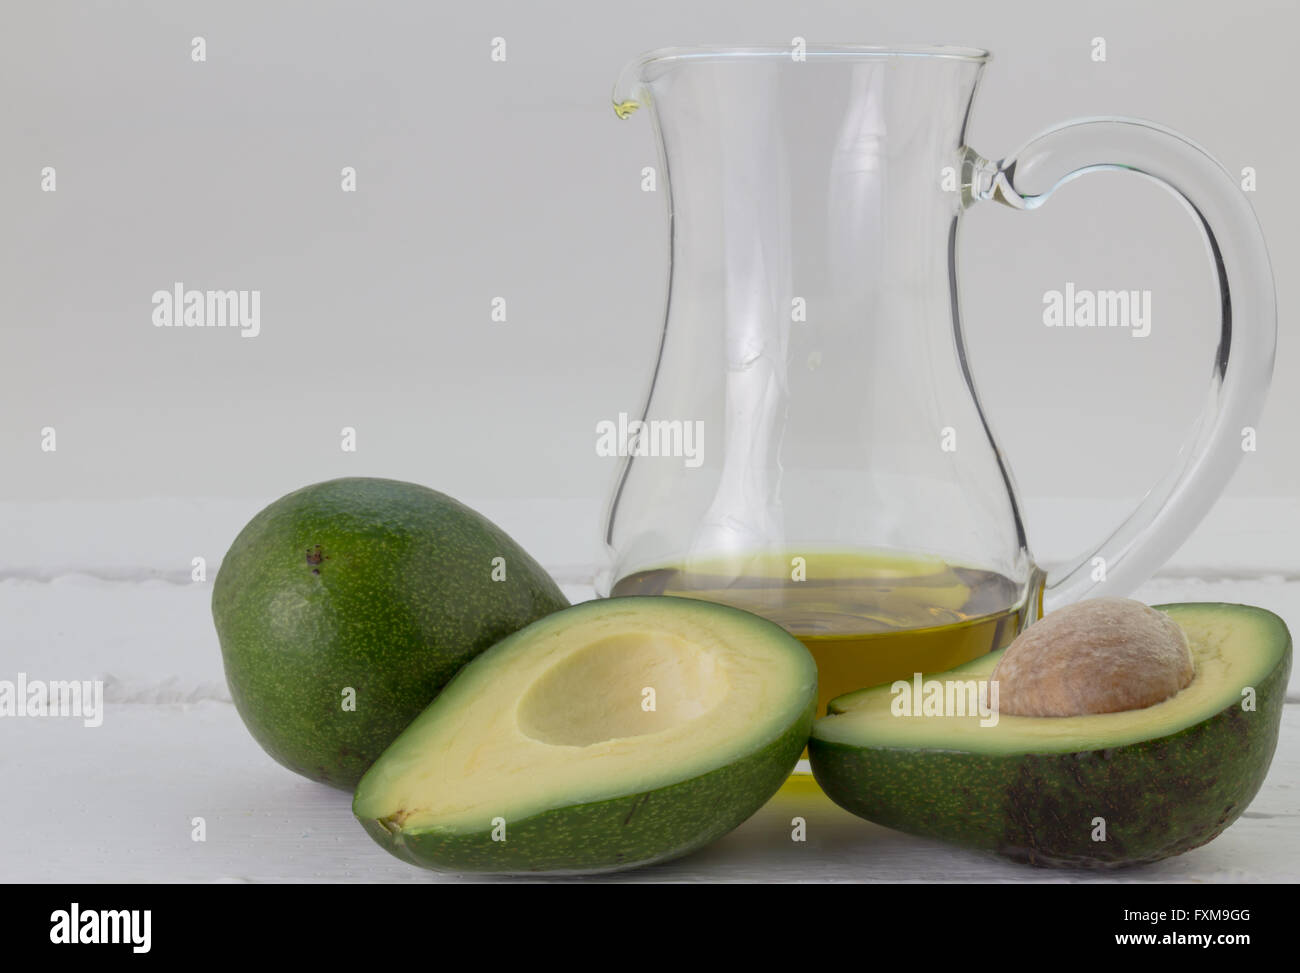 Imperfect avocados and a jug of avocado oil isolated on rustic white background Stock Photo